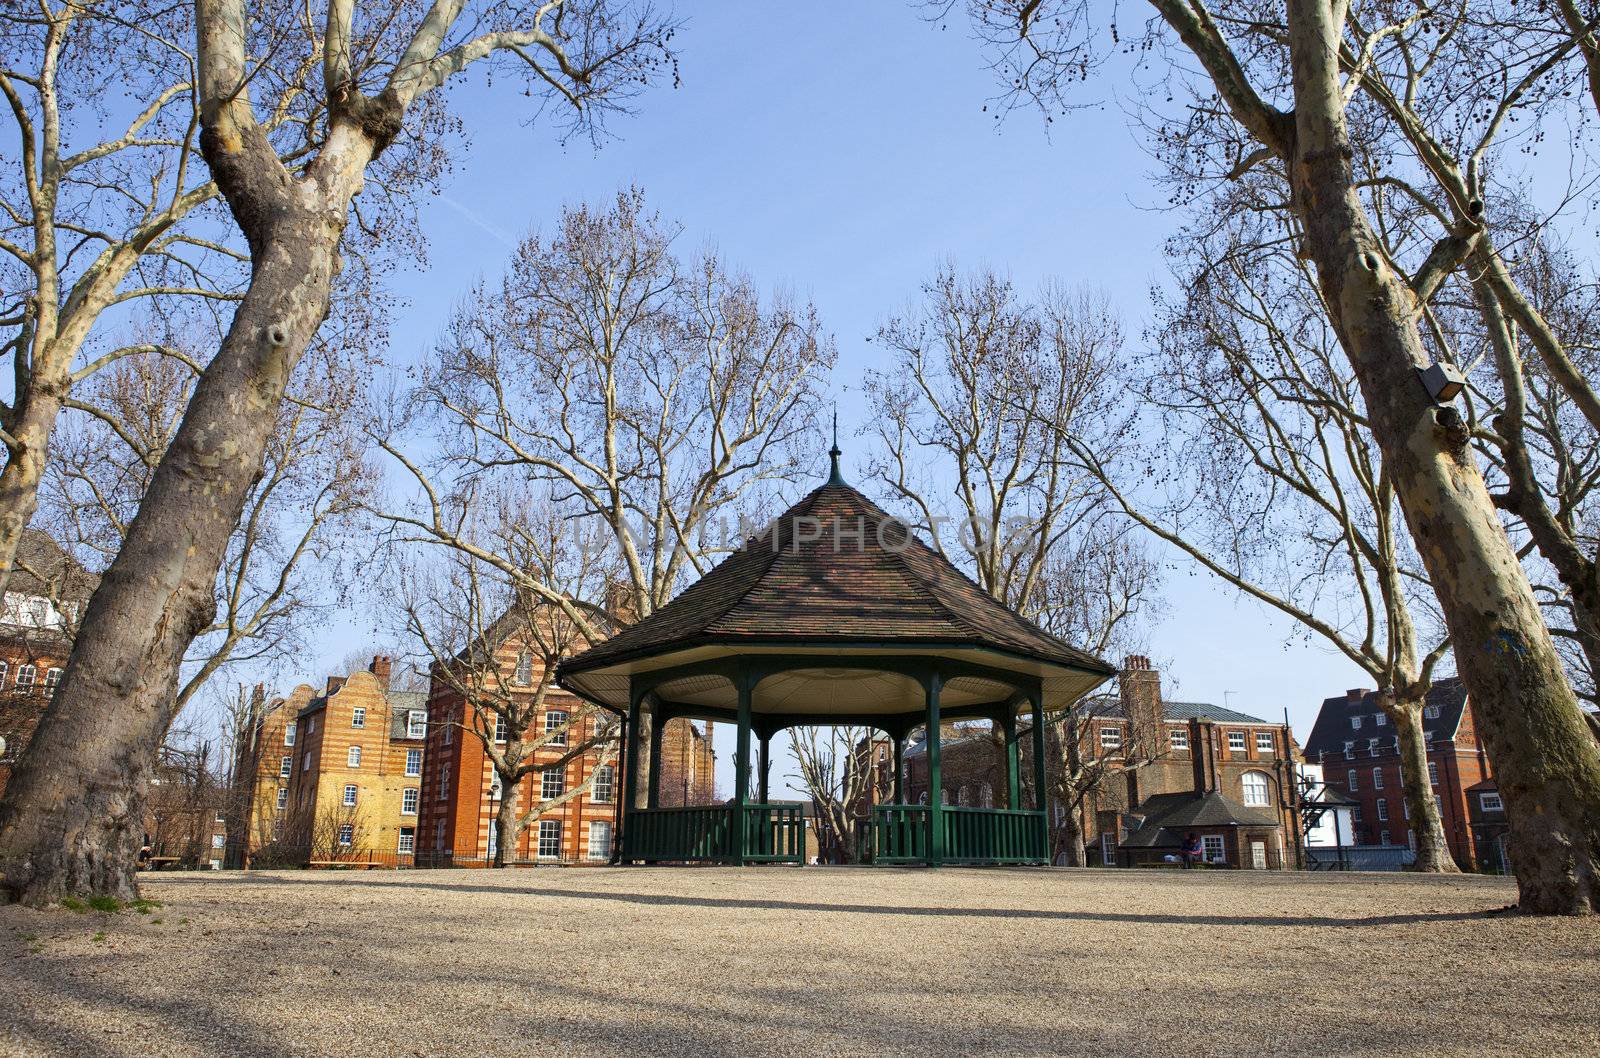 The Bandstand in Arnold Circus and the Boundary Estate in London.